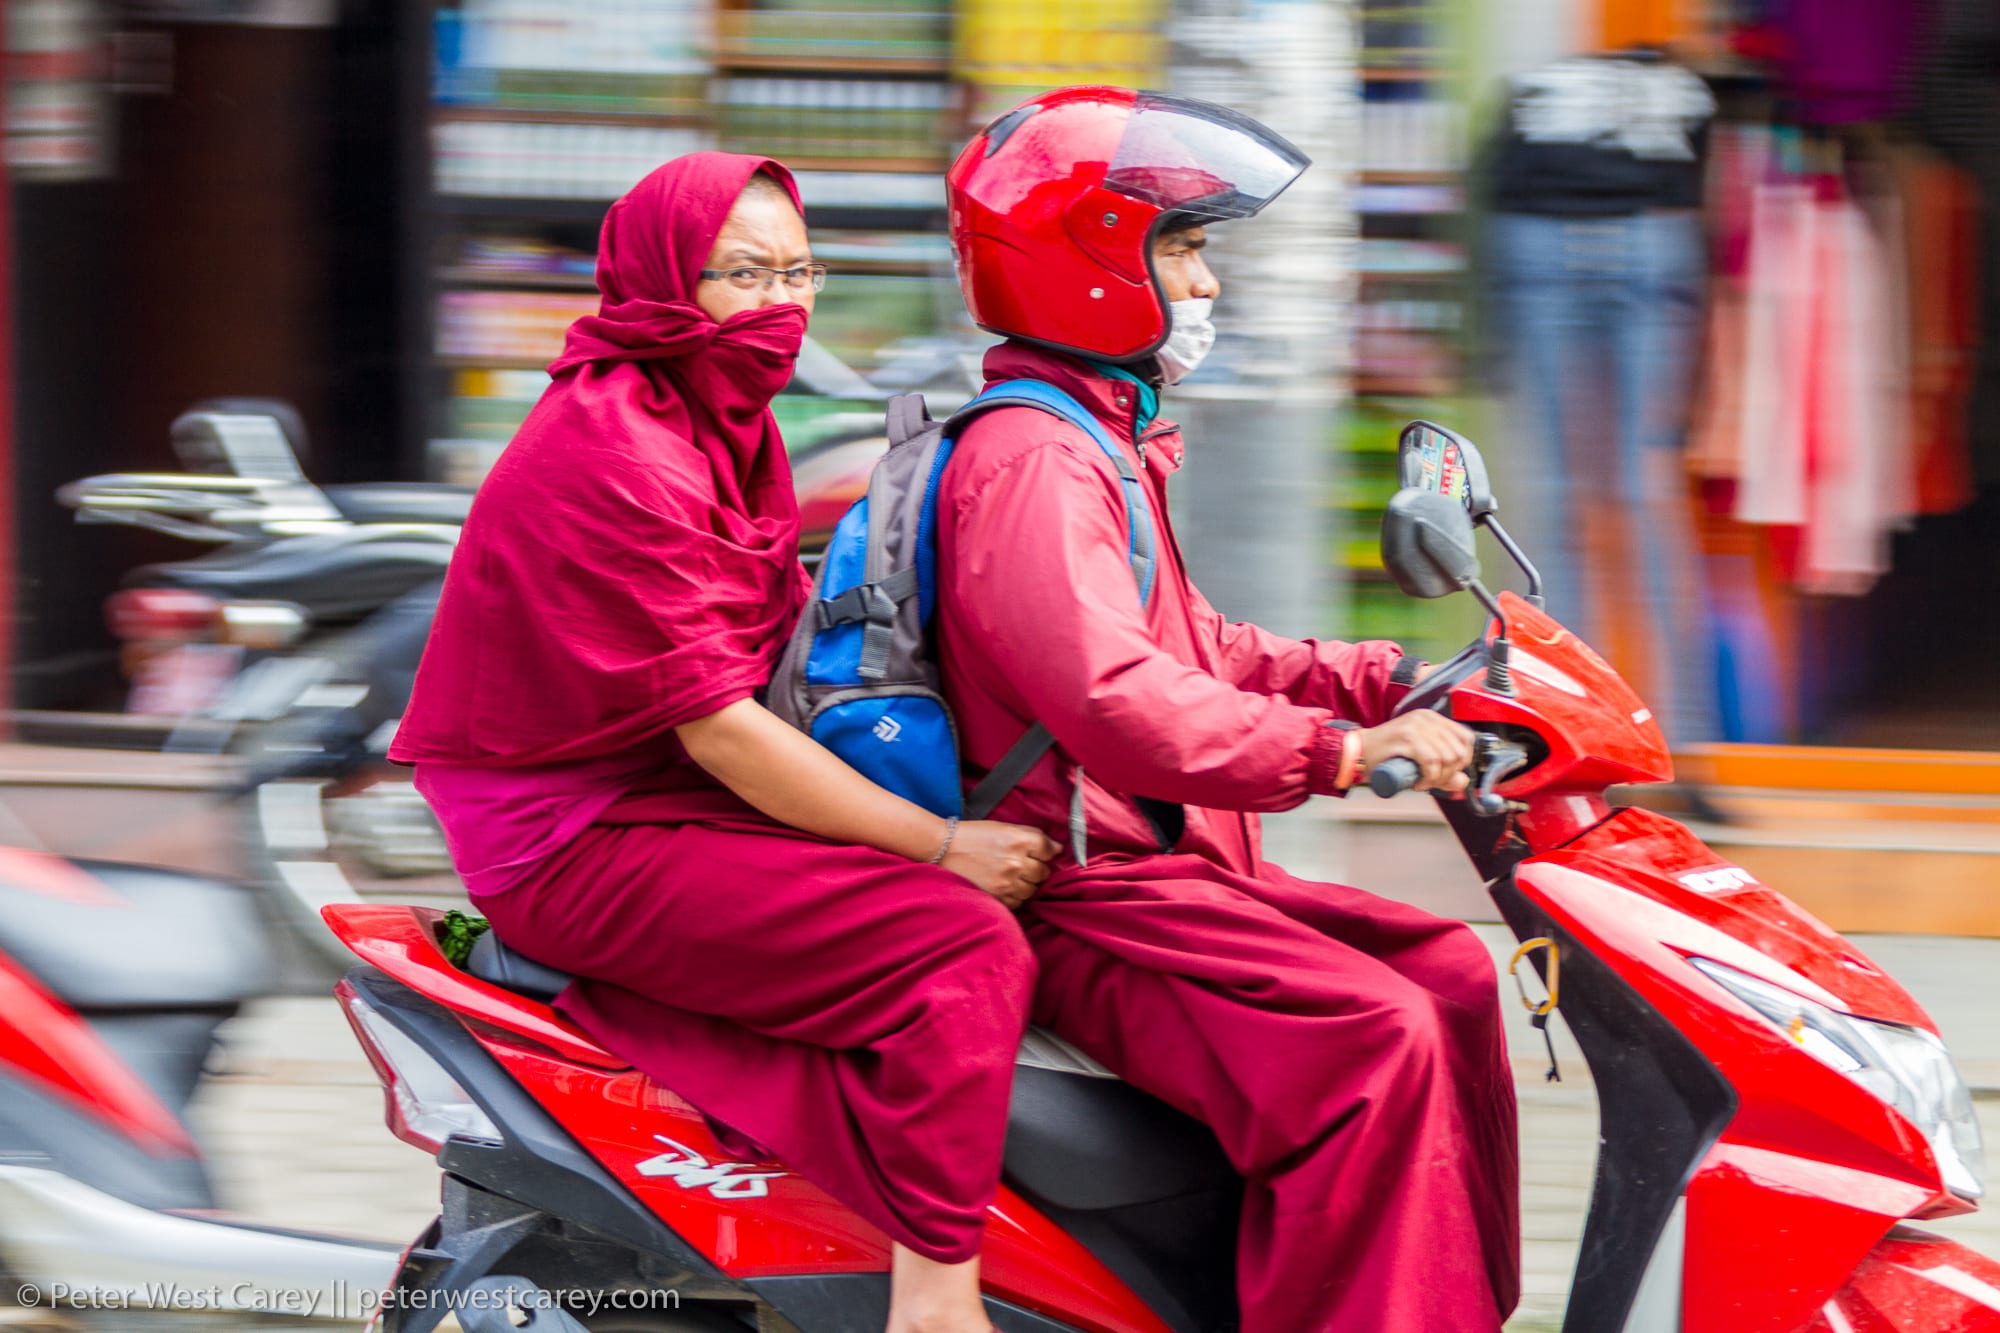 Monks riding on scooter – Nepal